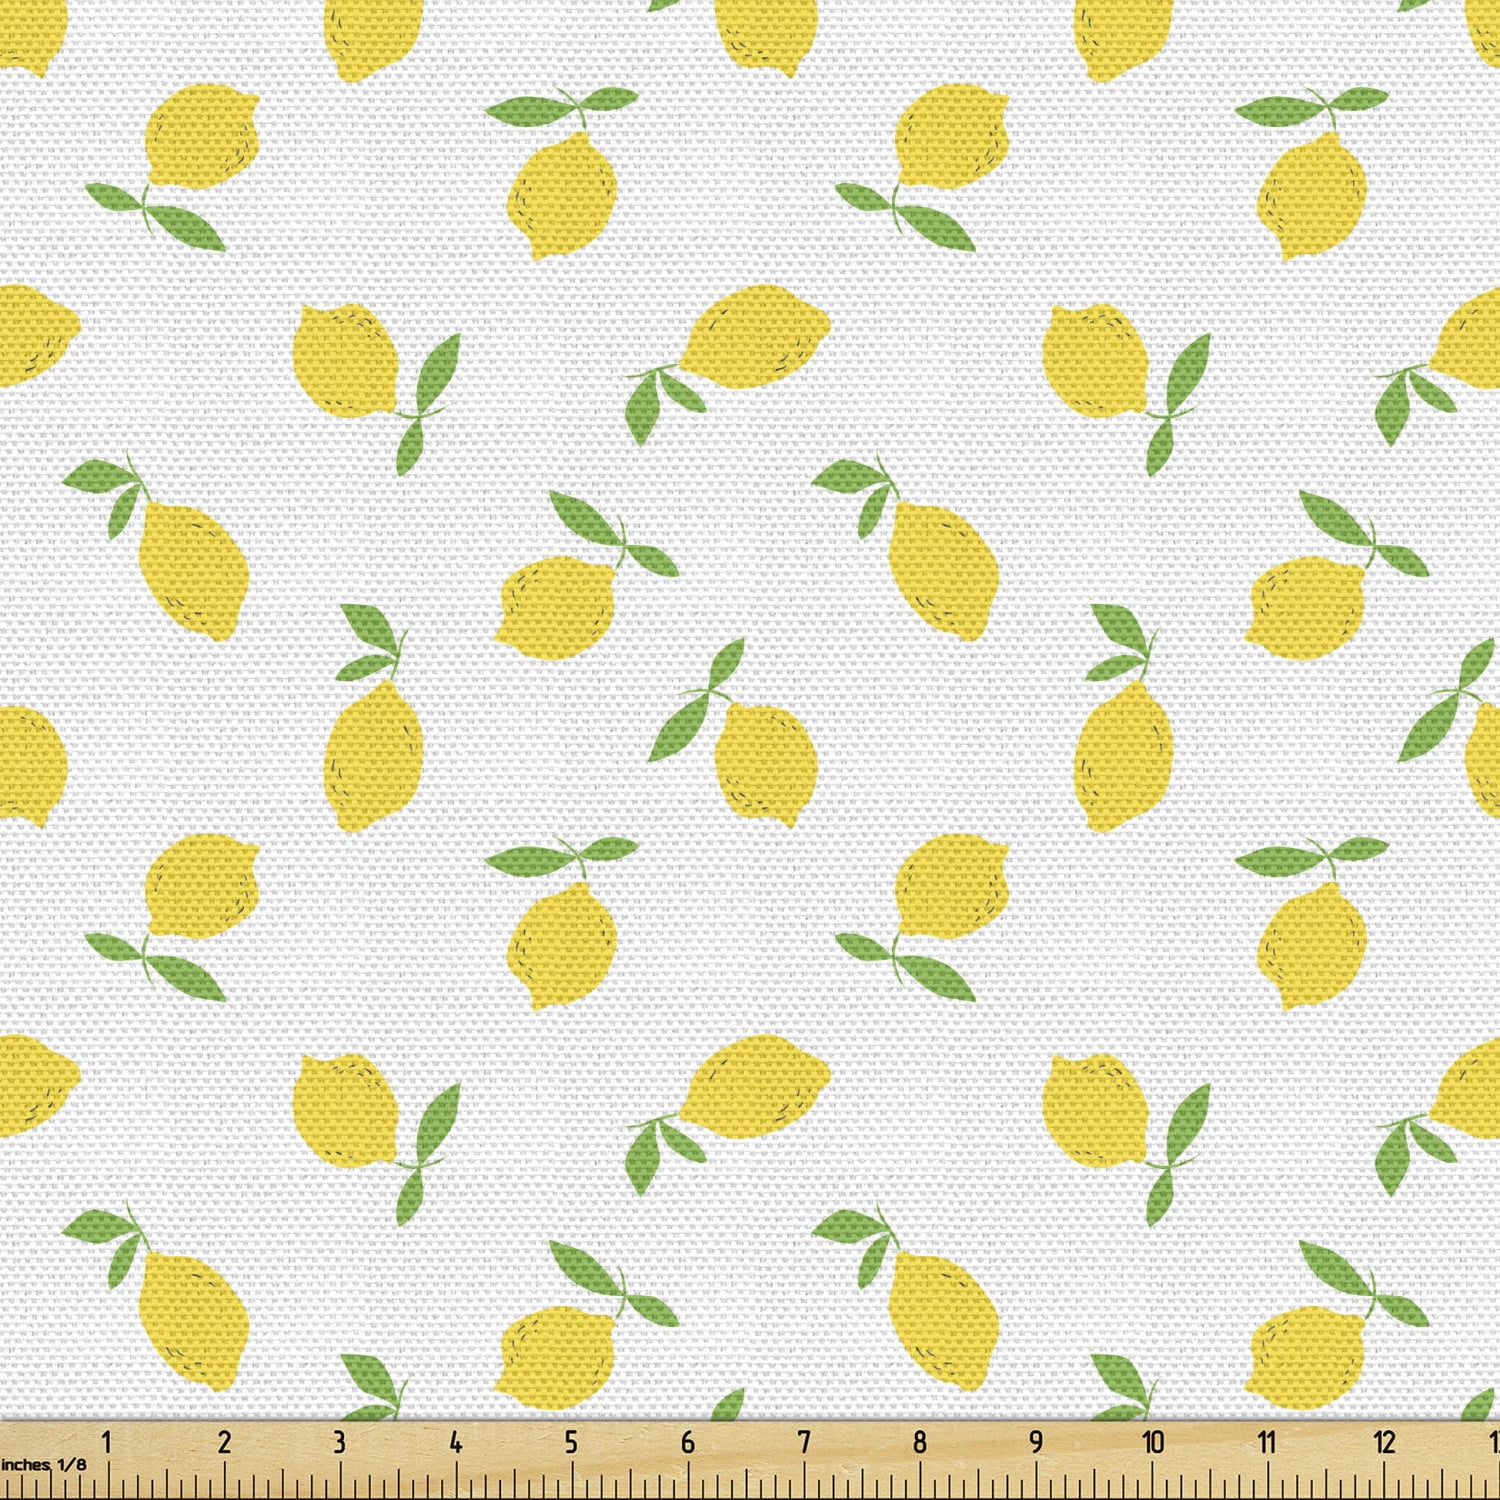 Lemon Fabric by the Yard, Summer Pattern with Cartoon Citrus Fruit Repetition, Decorative Upholstery for Sofas and Home 1 Yard, Mustard Lime Green by Ambesonne - Walmart.com